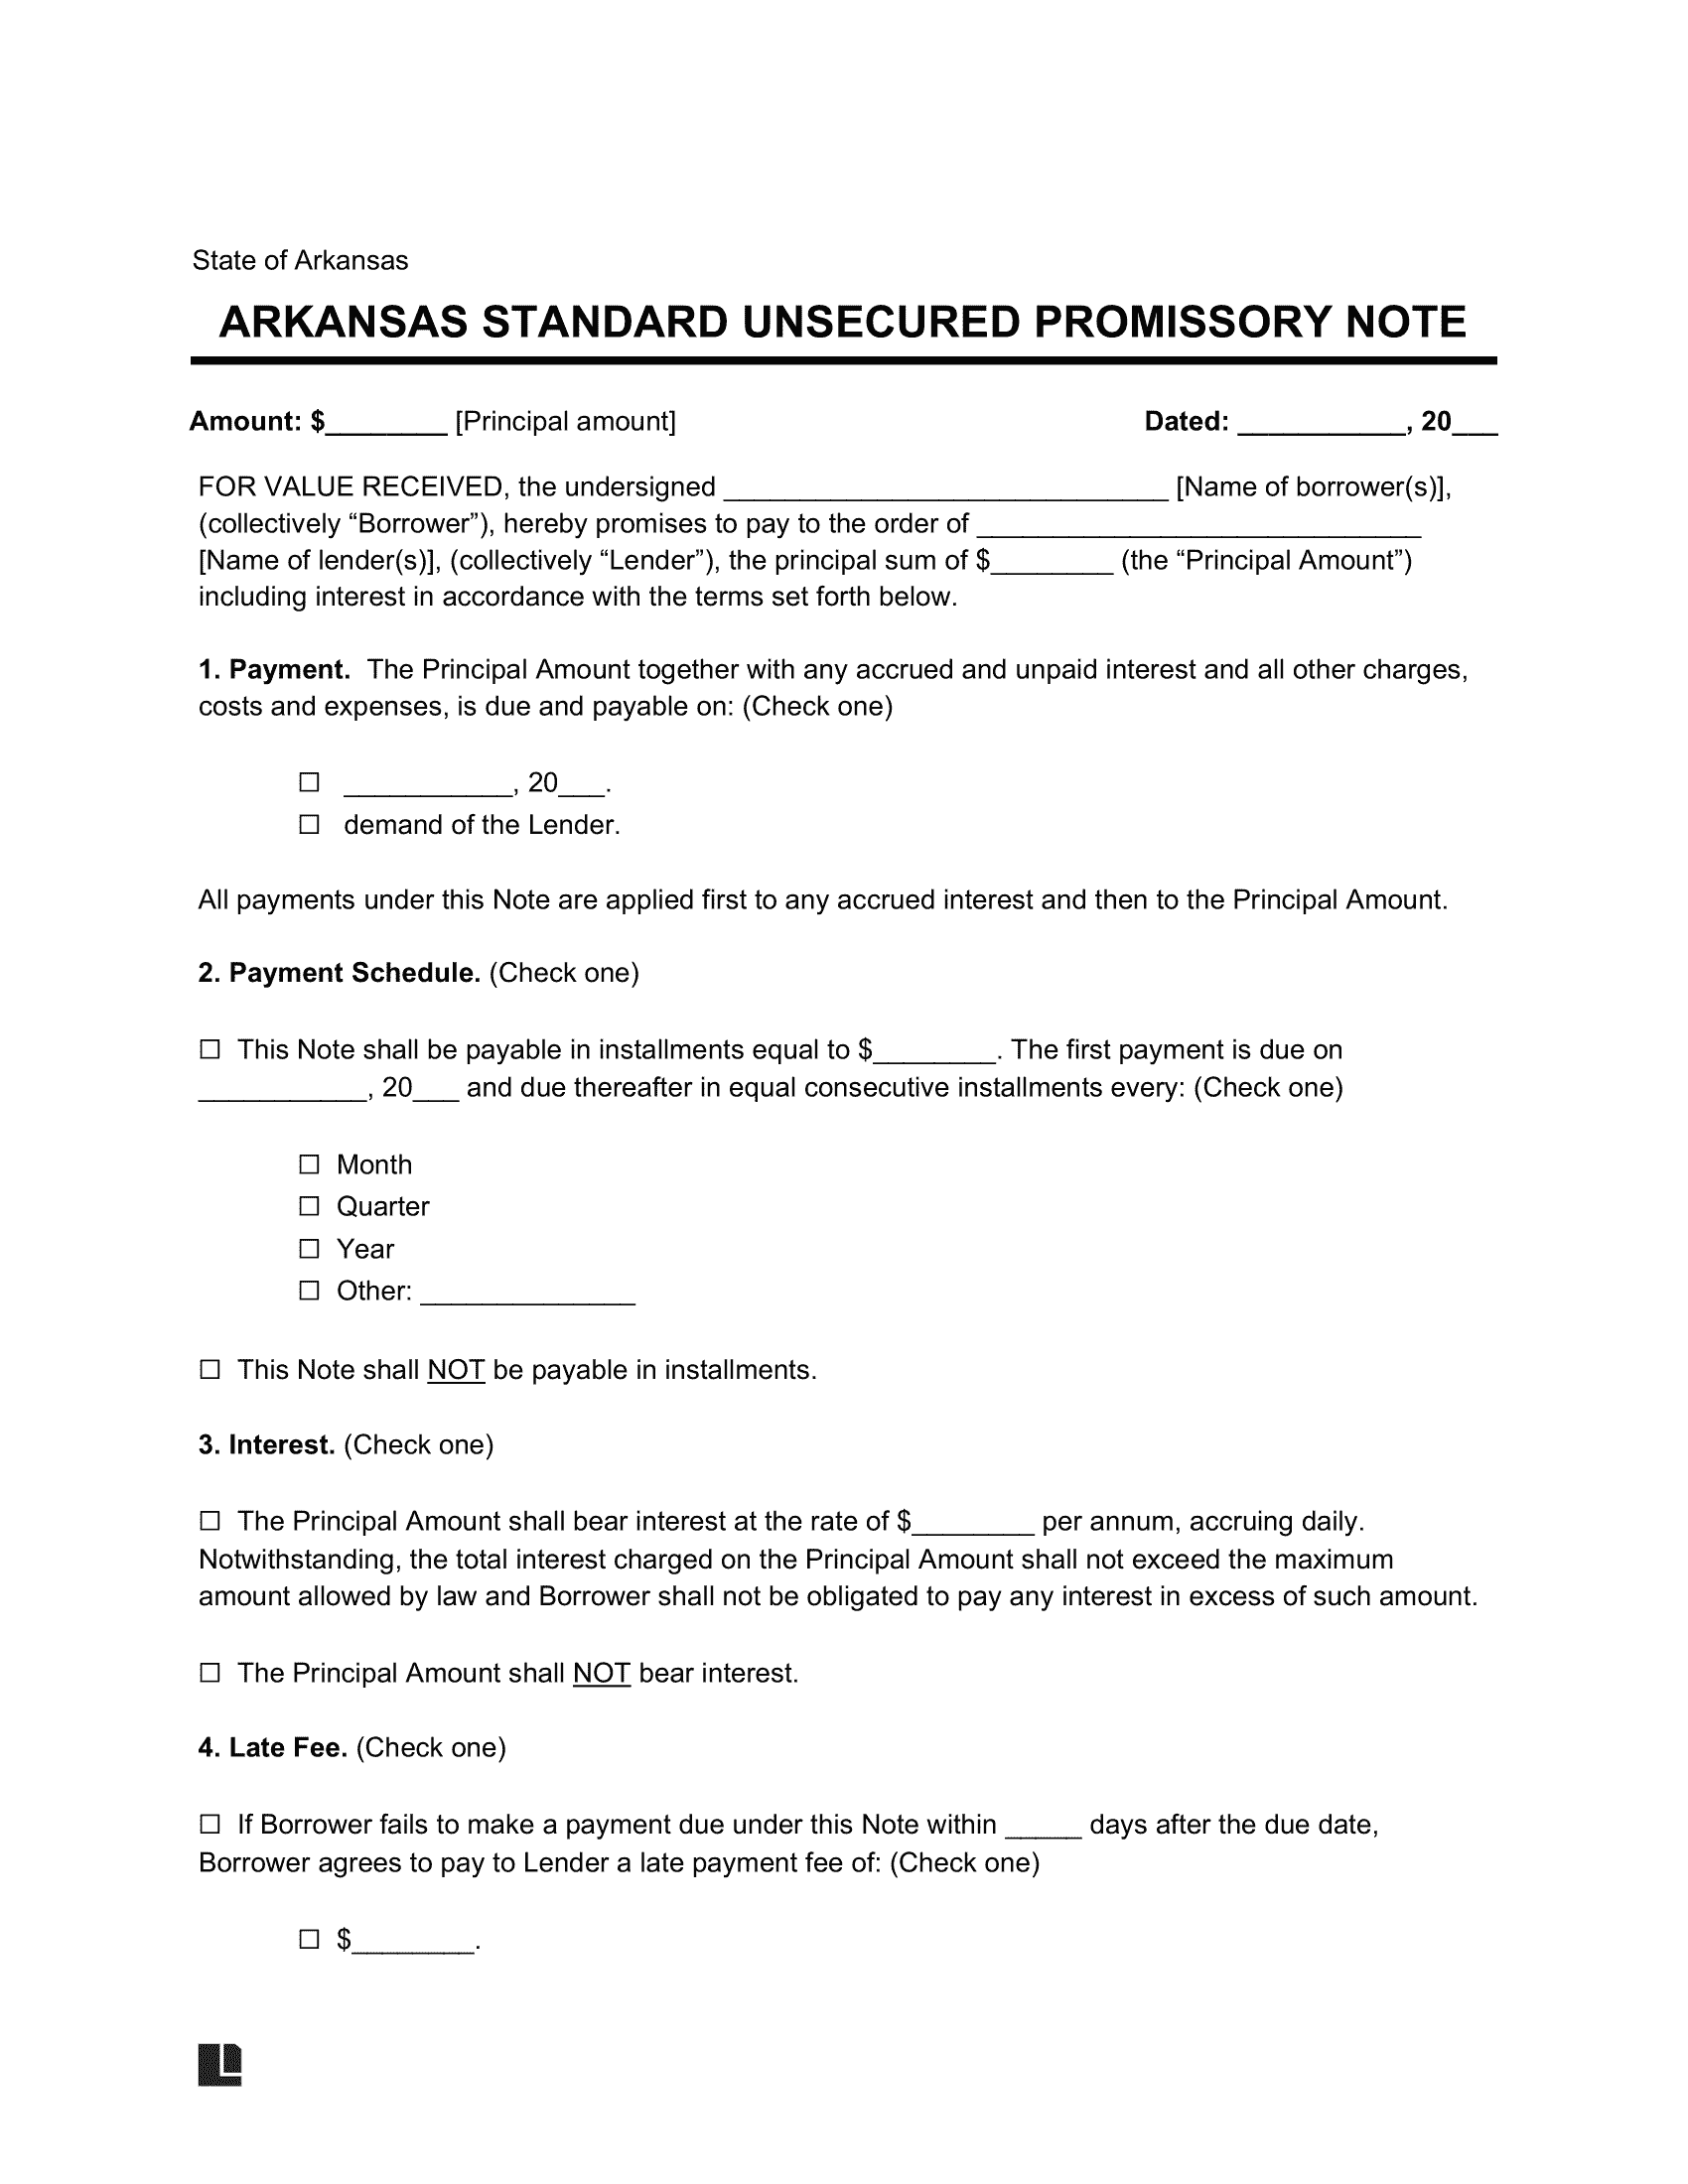 Arkansas Standard Unsecured Promissory Note Template